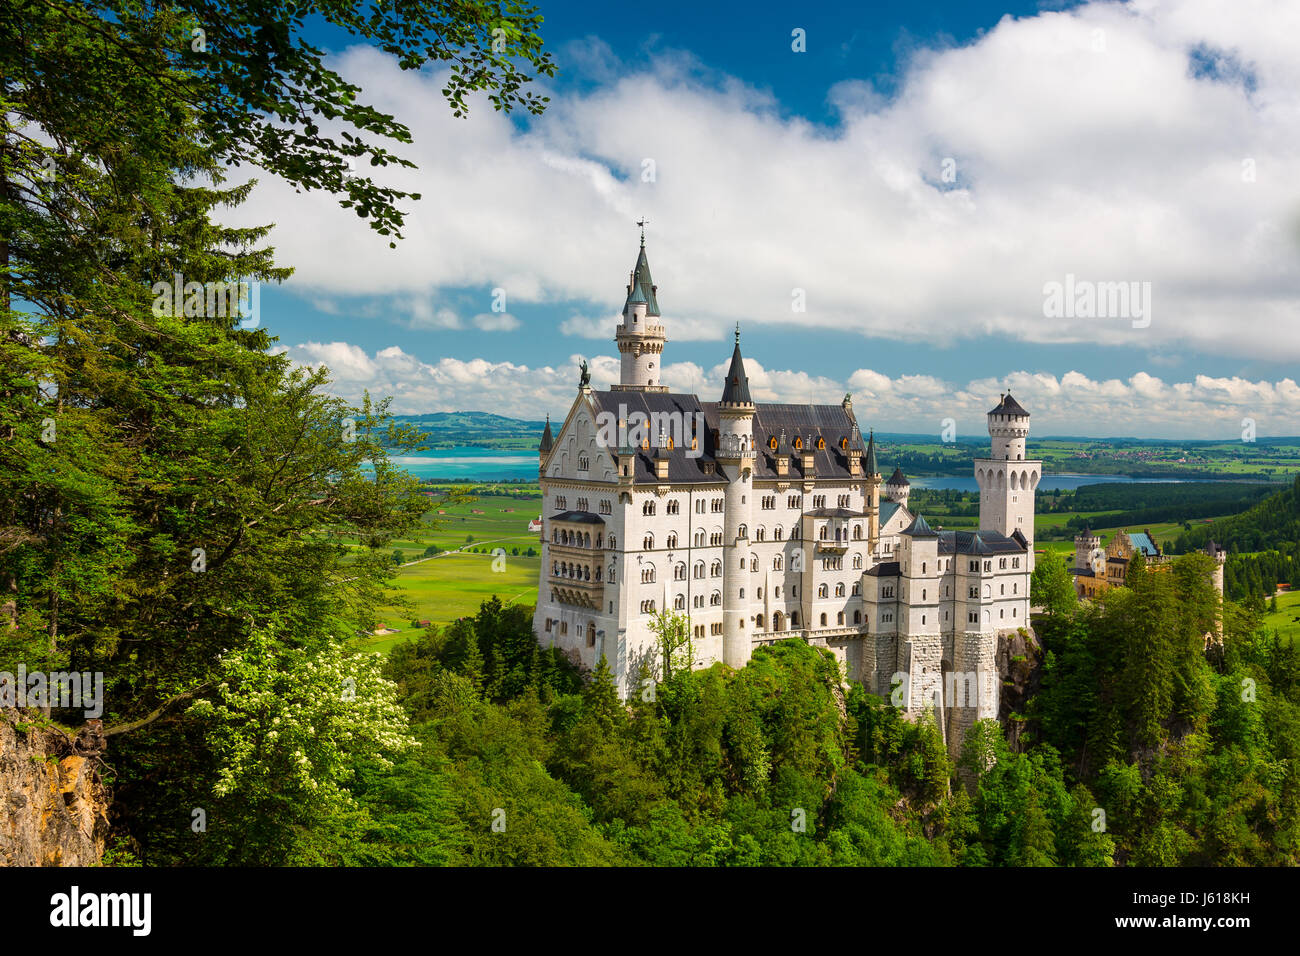 Neuschwanstein Castle on the top of the mountain, Fairytale castle in southwest Bavaria, Germany Stock Photo